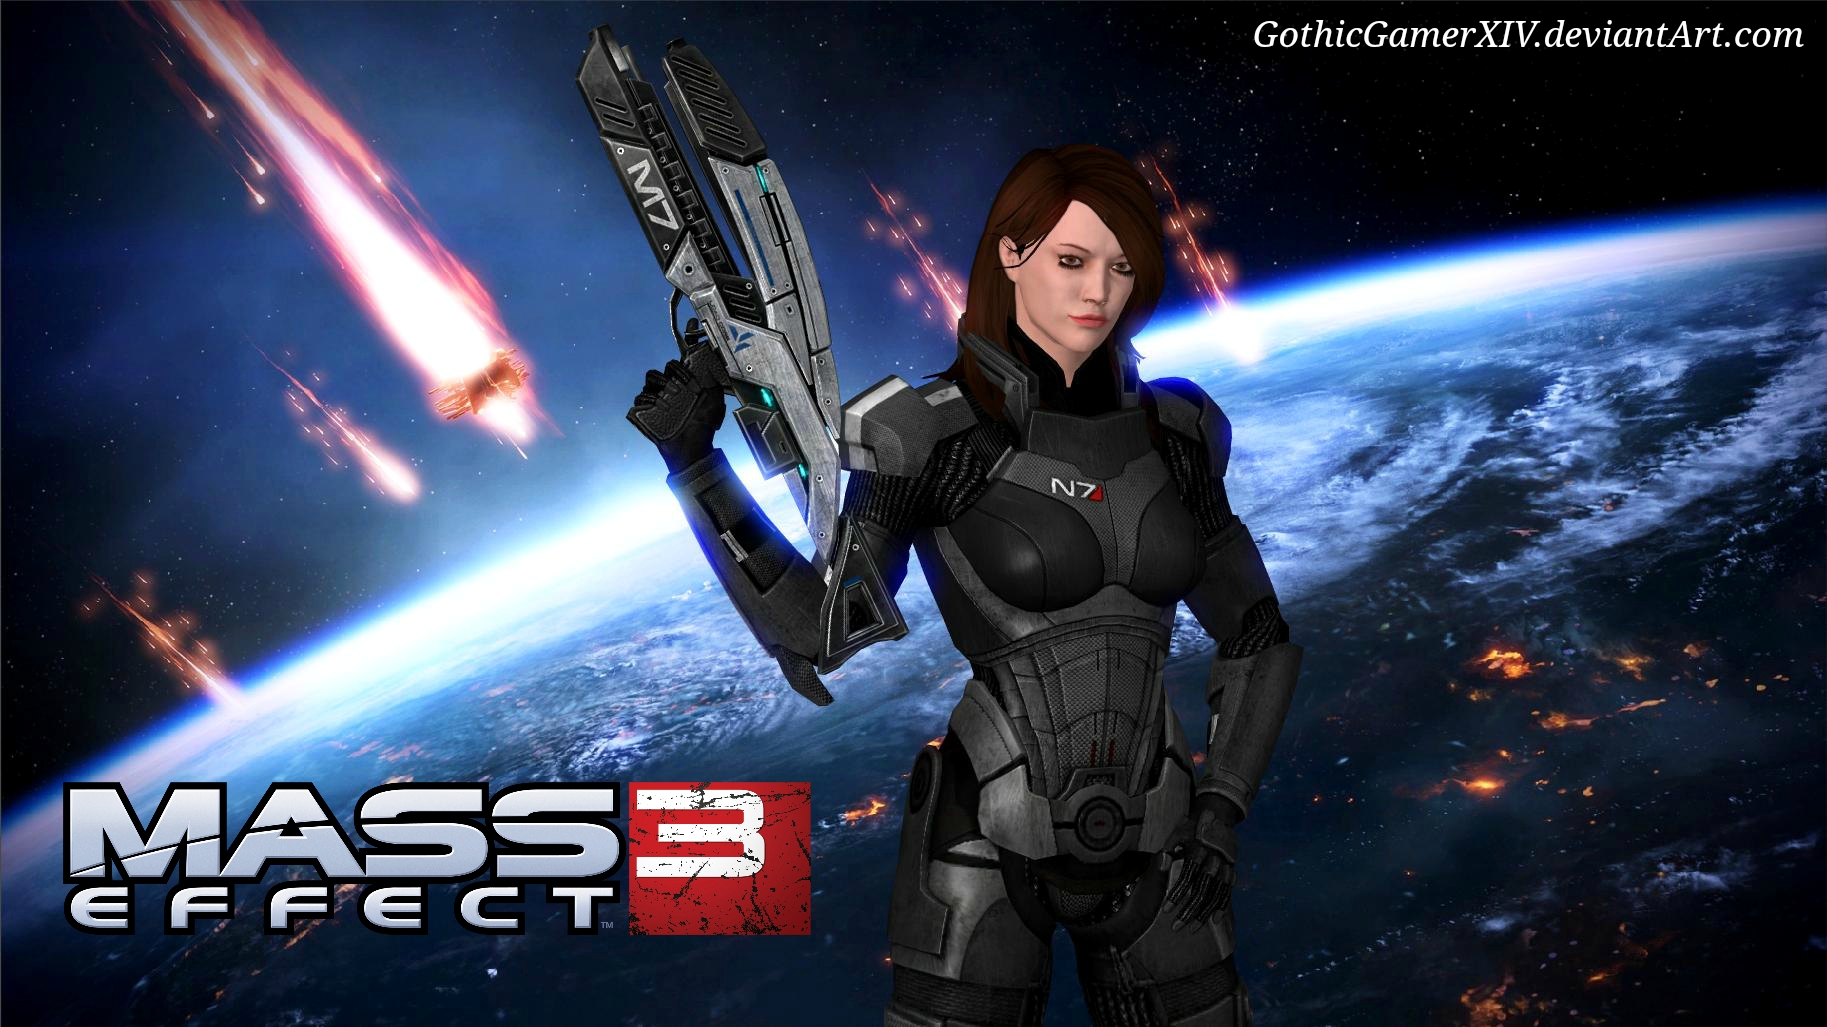 mass_effect_3_greetings____by_gothicgame